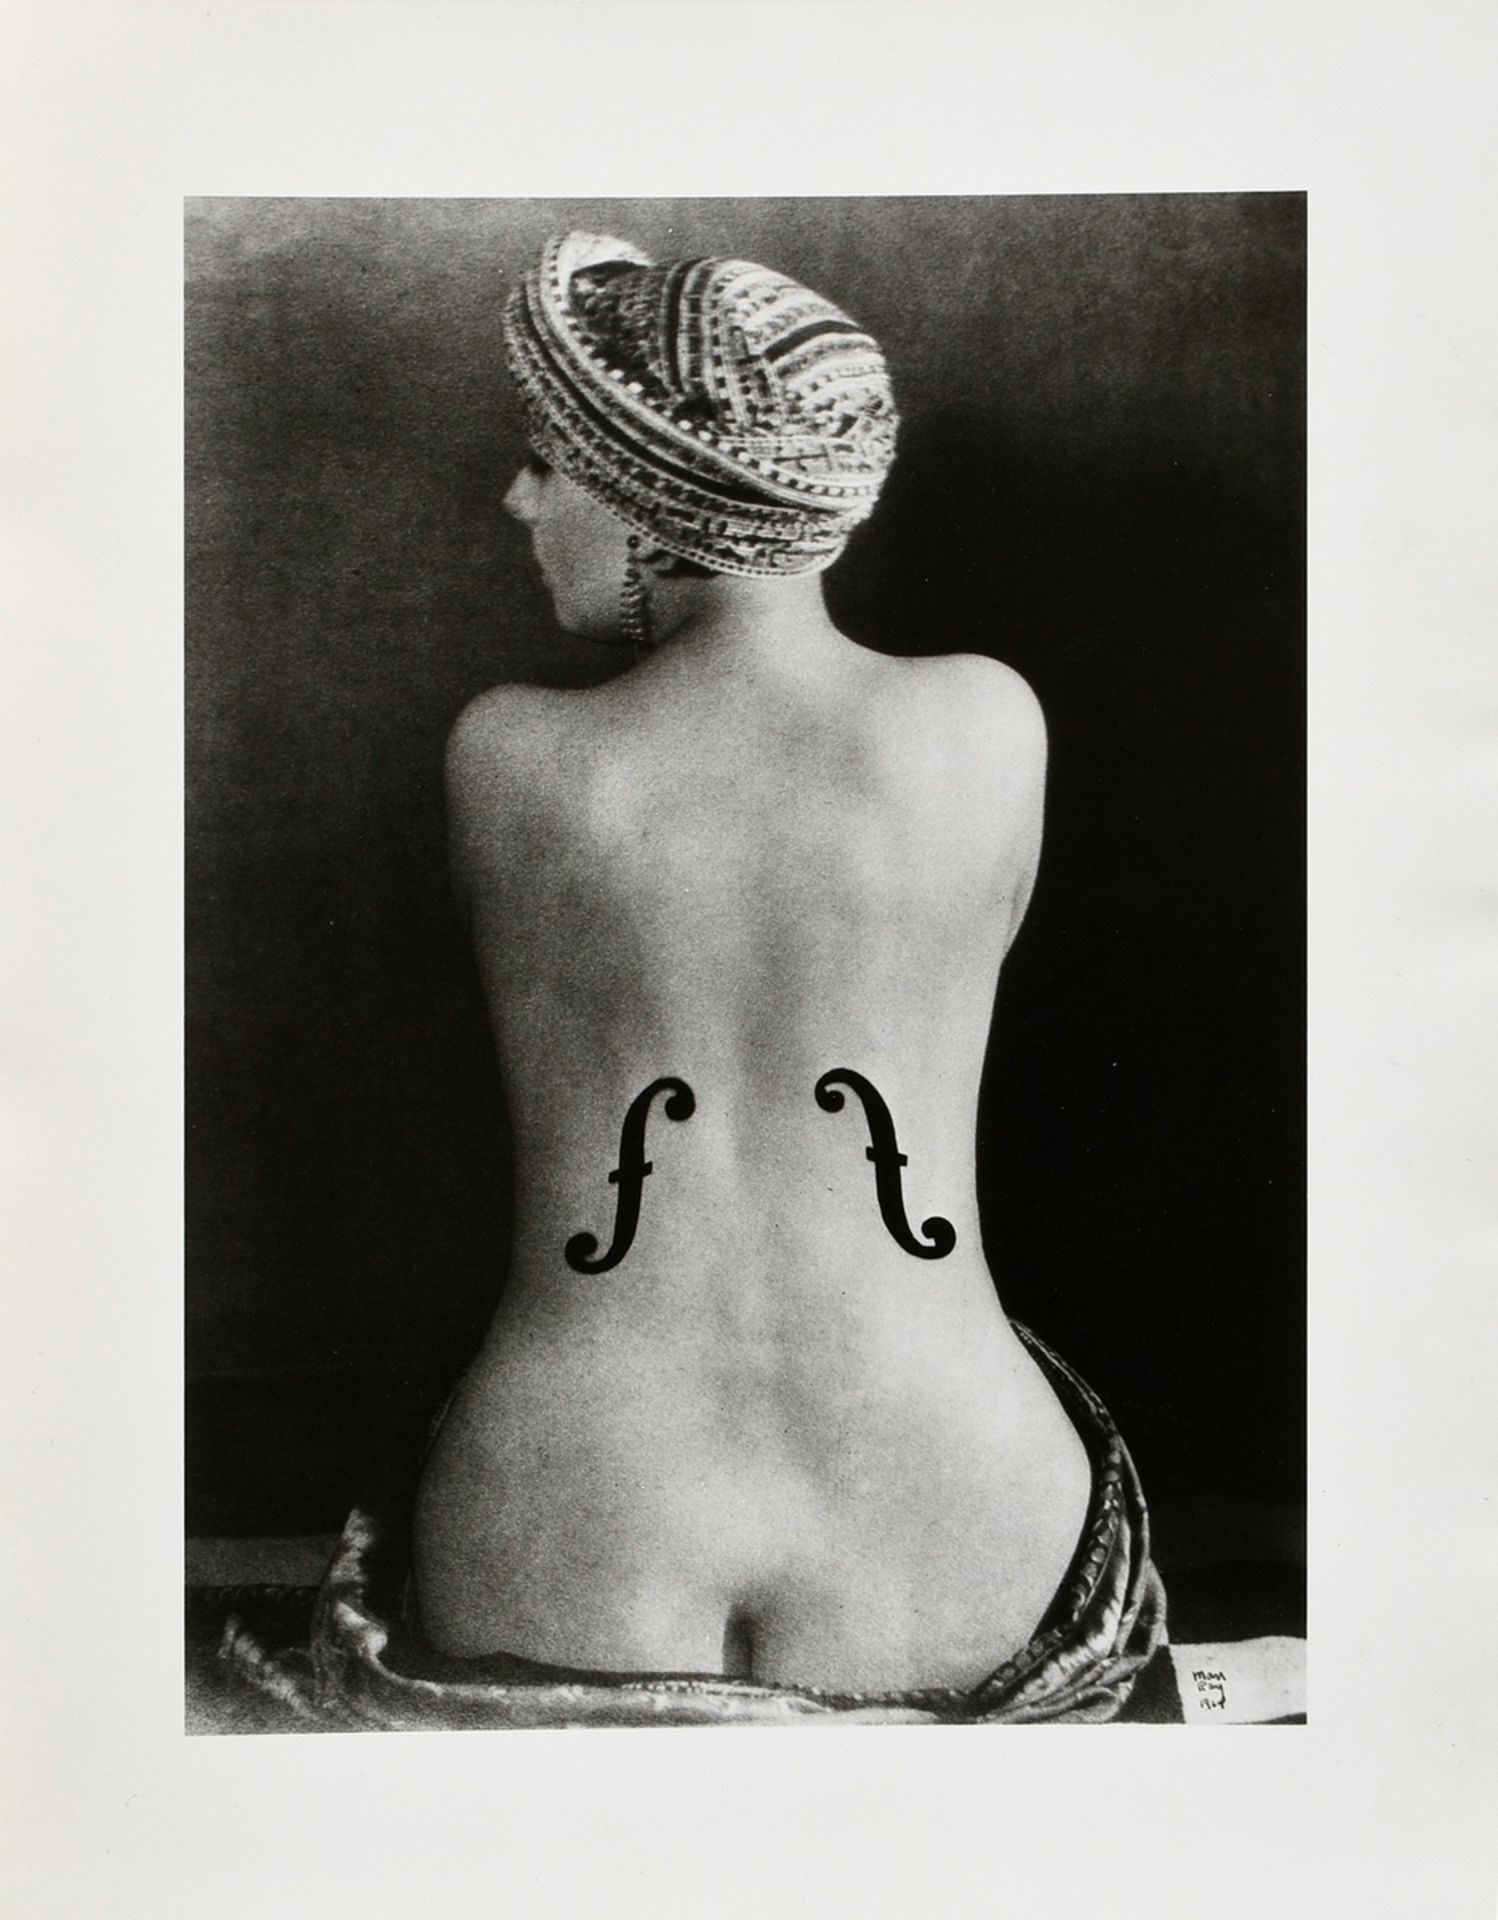 Man Ray (1890-1976) "Le Violon d'Ingres" 1924/1992, photograph, Griffelkunst, l.r. in photo sign., 